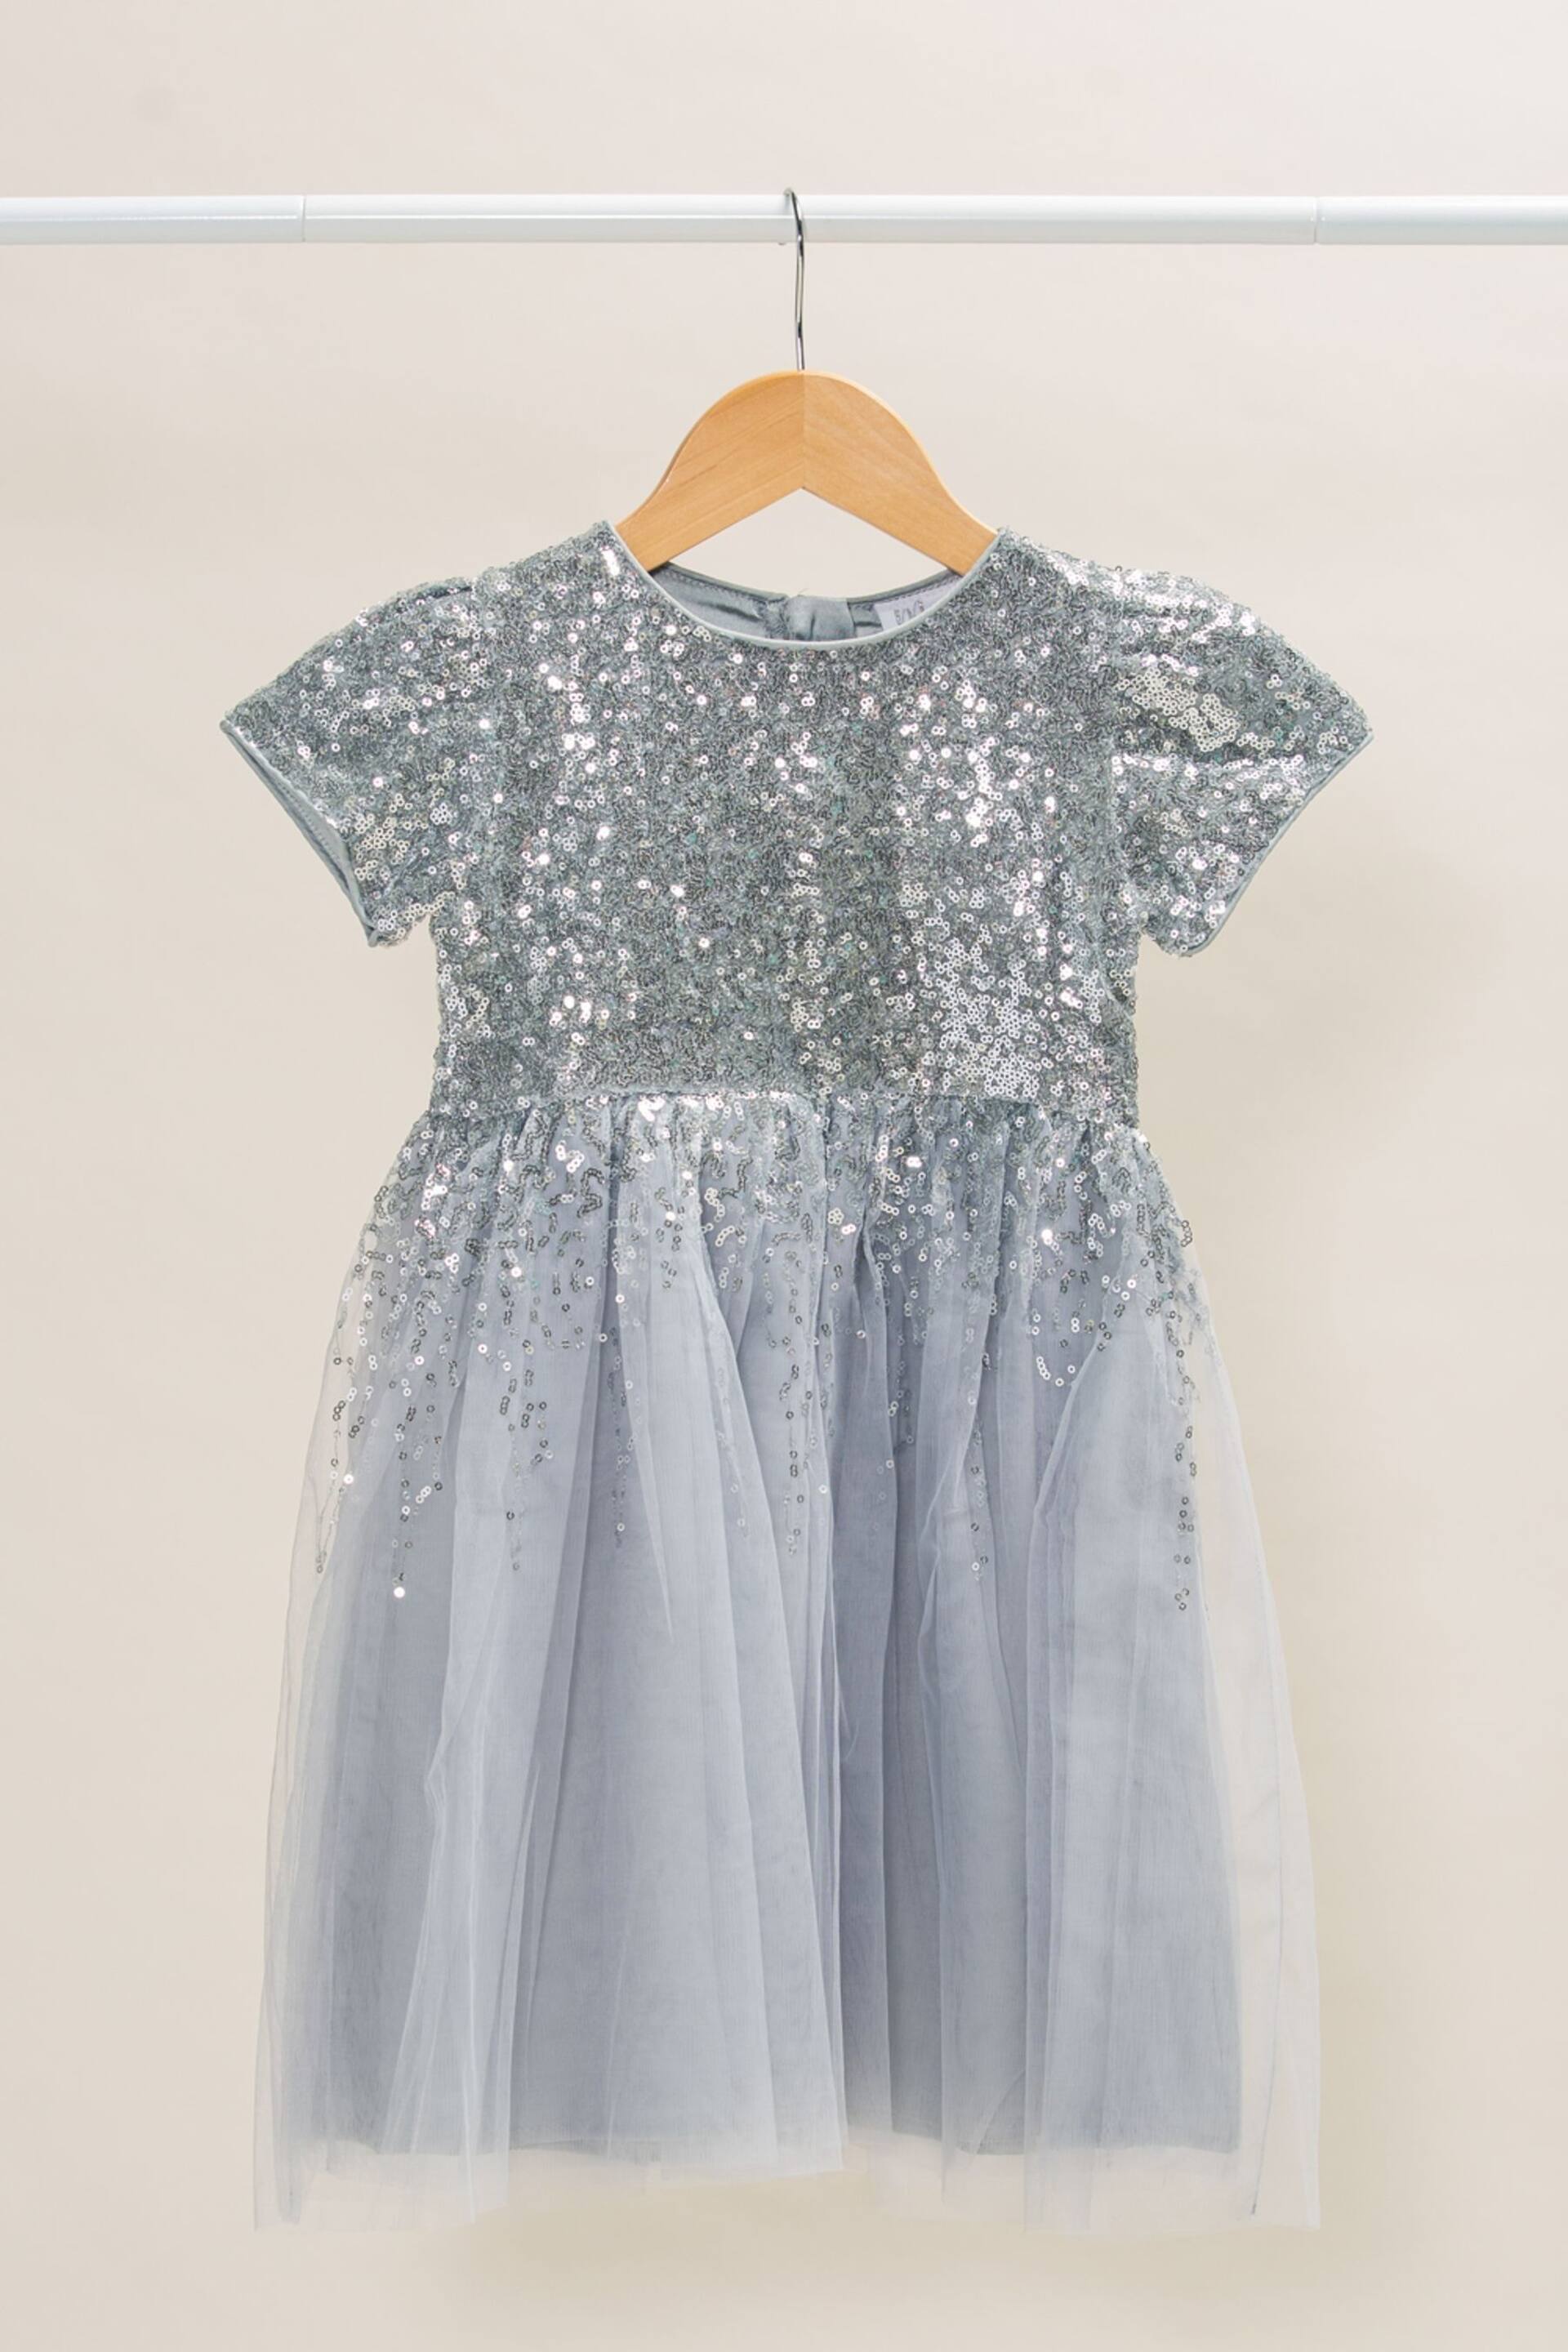 Miss Sequin Top Waterfall Tulle Dress - Image 1 of 3